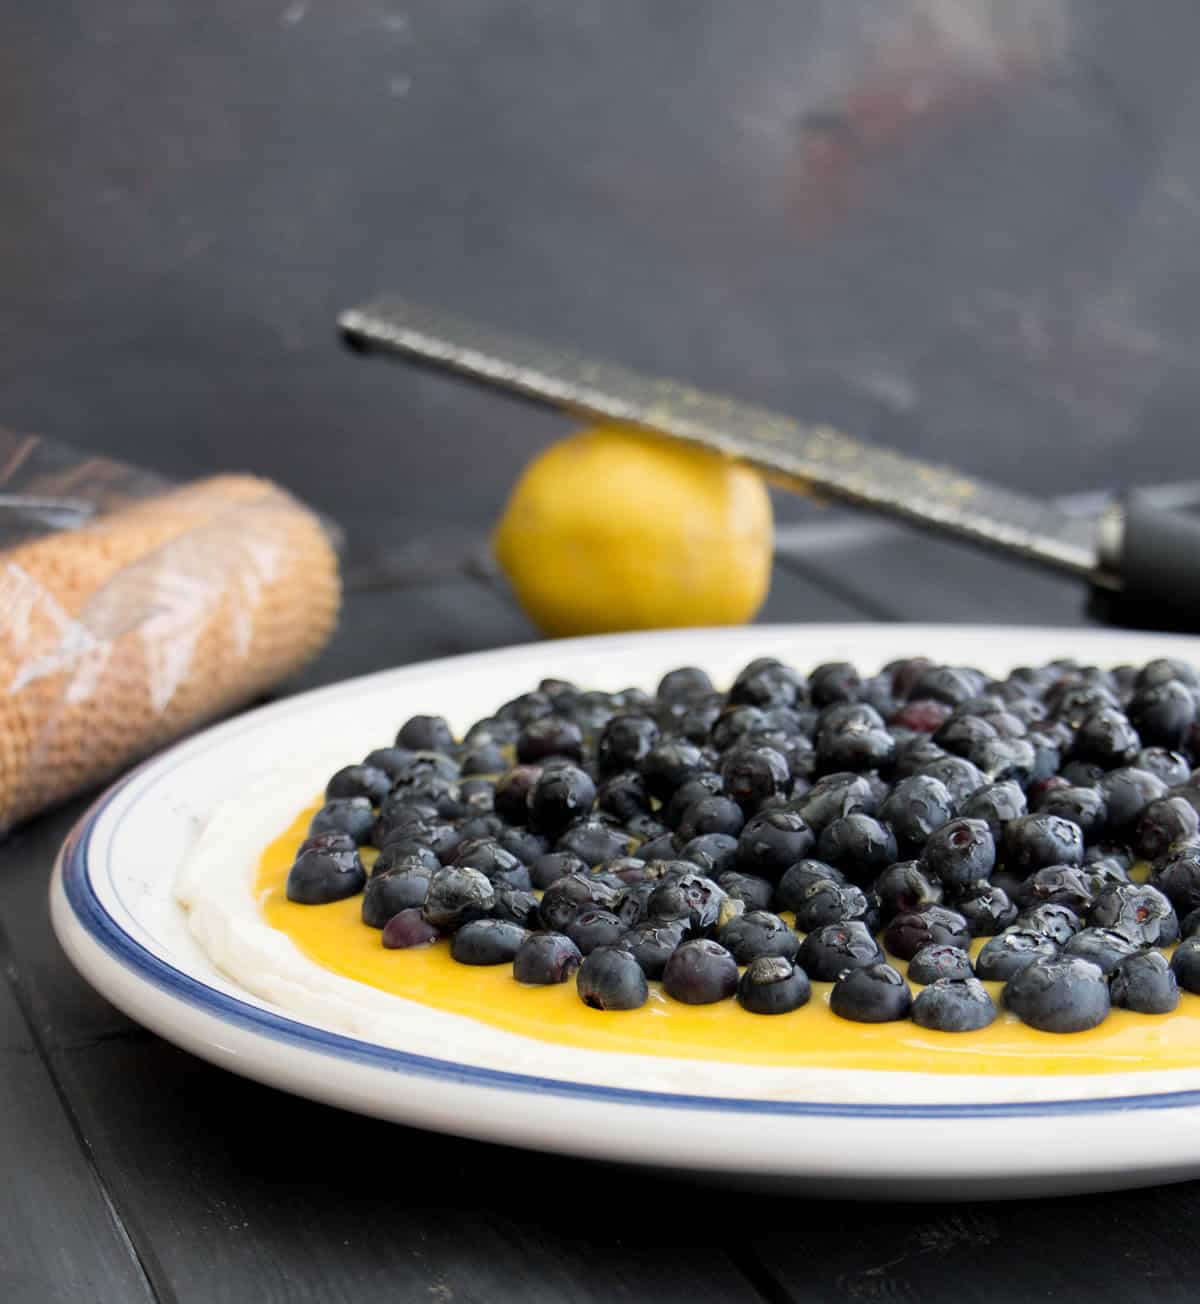 Lemon Blueberry Cheesecake Dip. No bake cheesecake layered with lemon curd and fresh blueberries. It's a dip that looks like a fancy dessert!